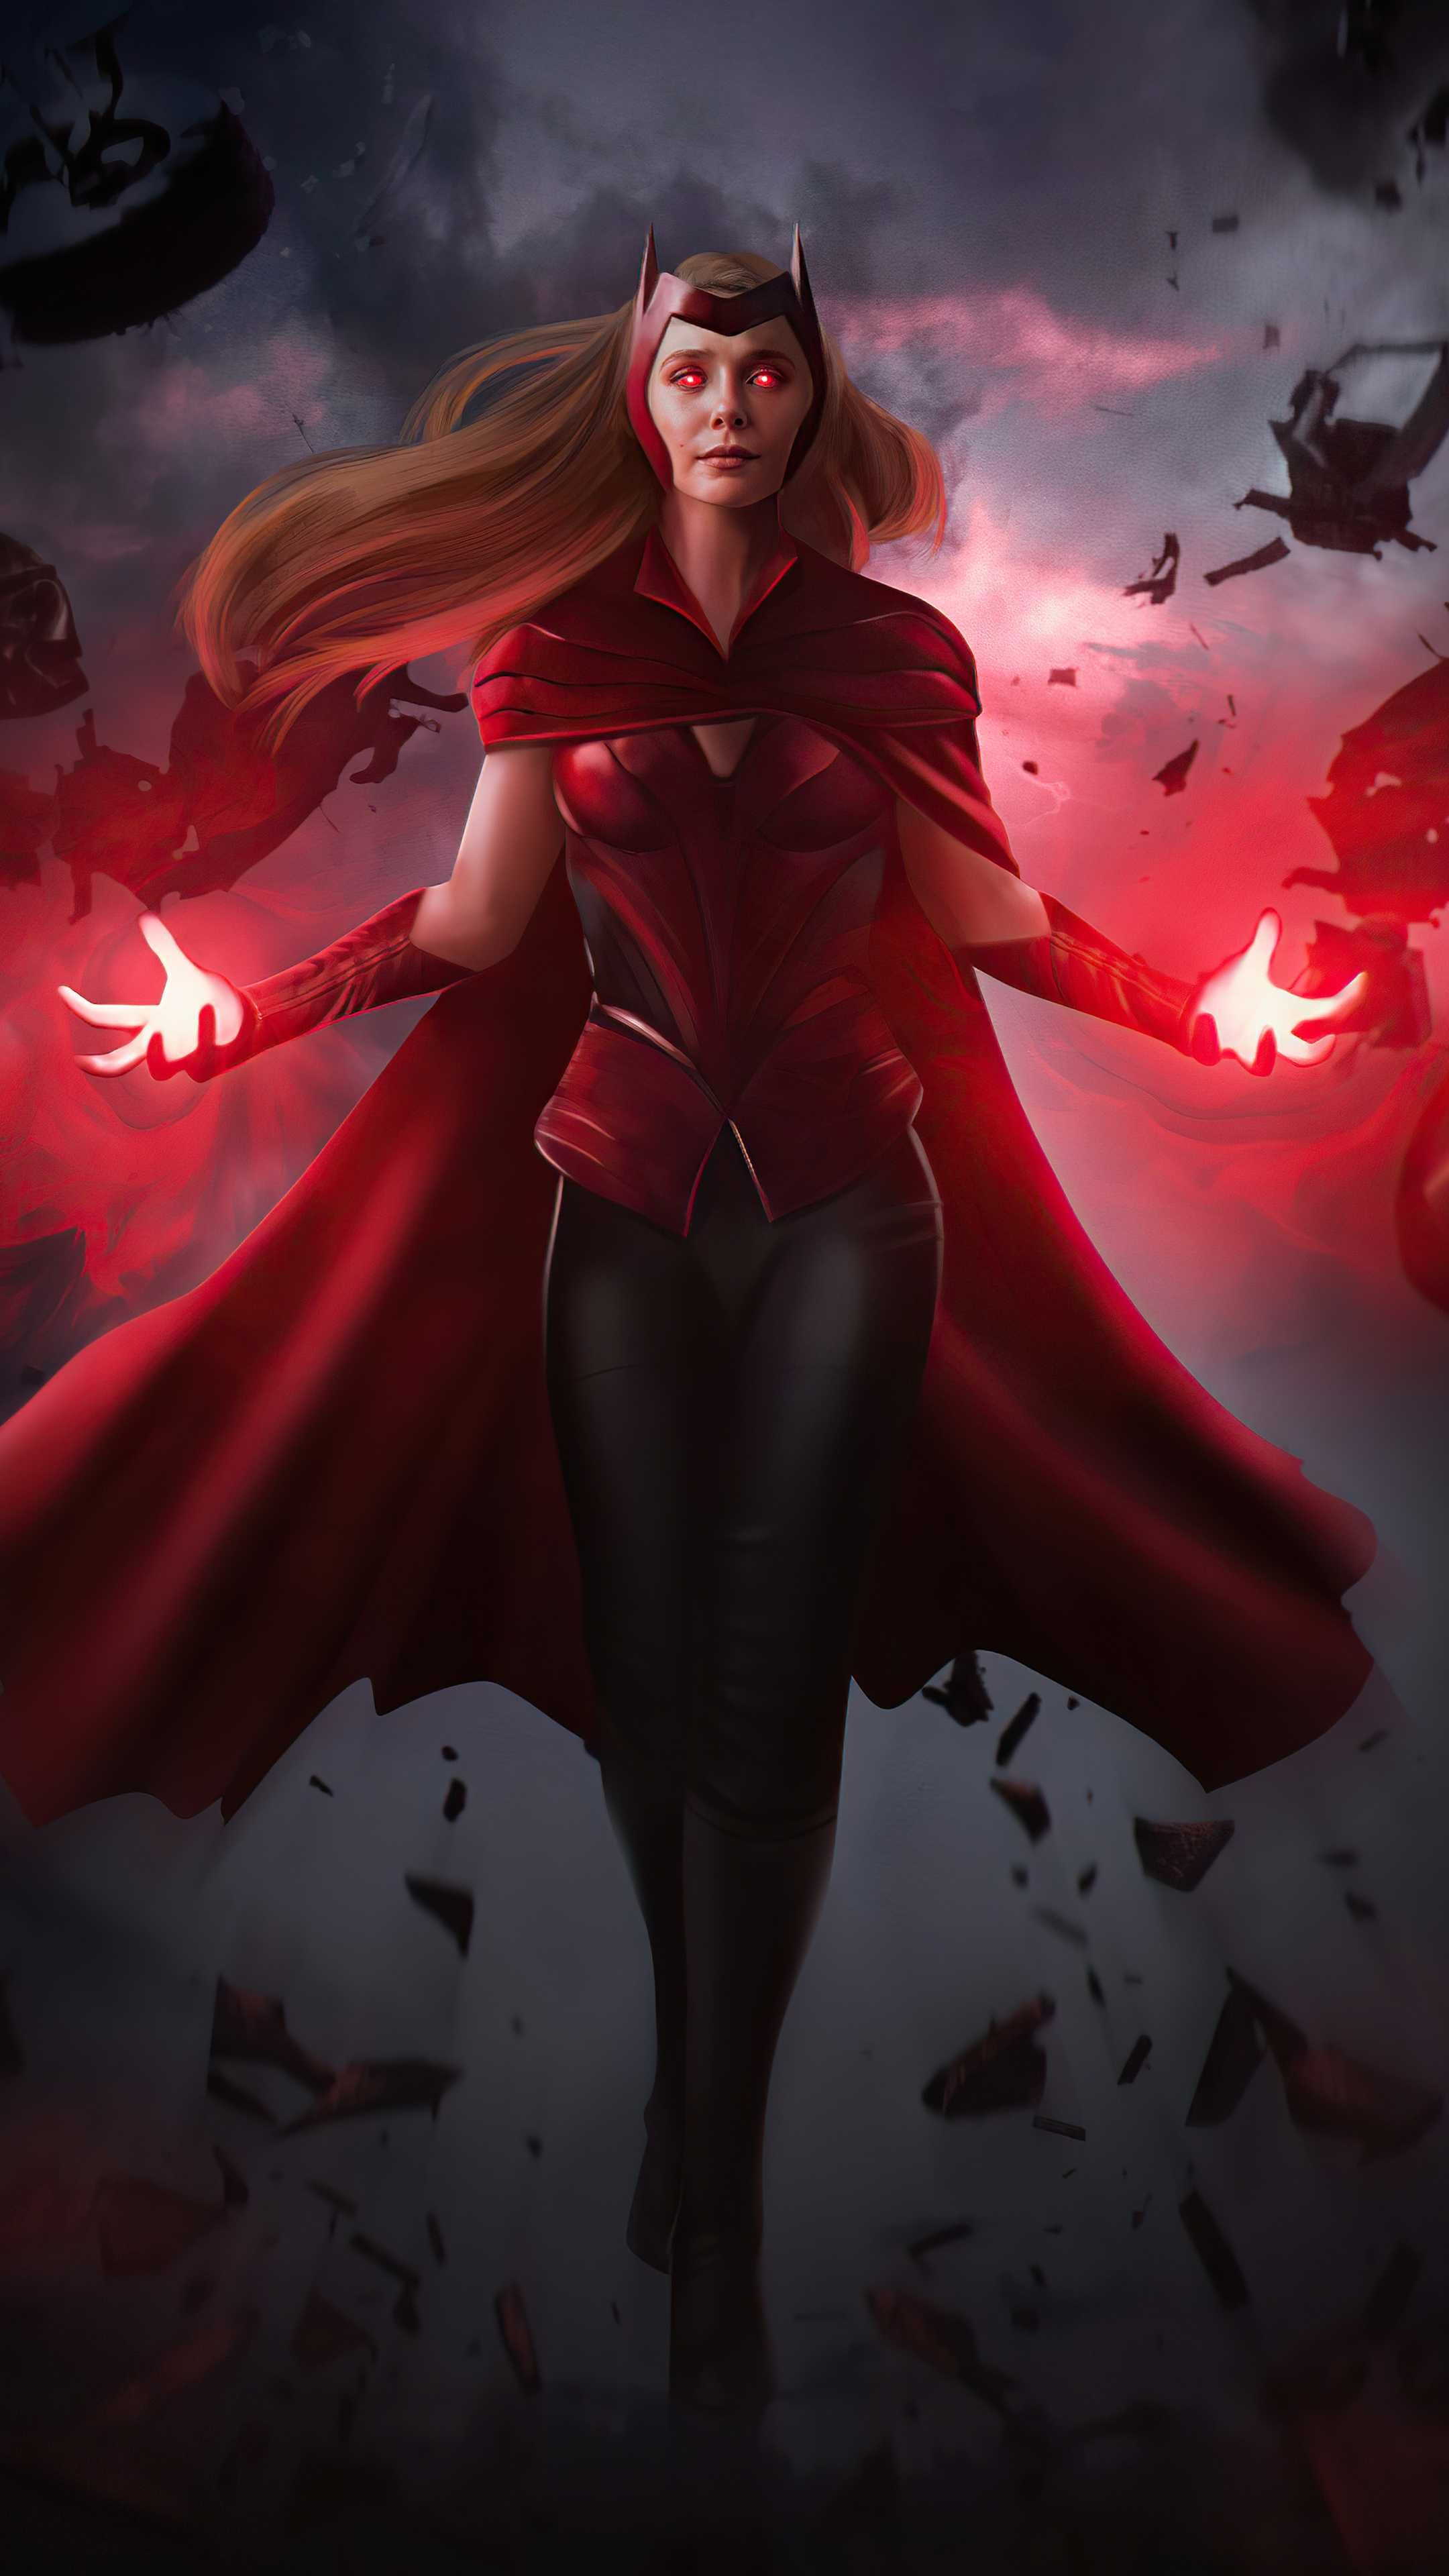 Download wallpaper 750x1334 the scarlet witch wanda vision 2021 fan art  iphone 7 iphone 8 750x1334 hd background 26969